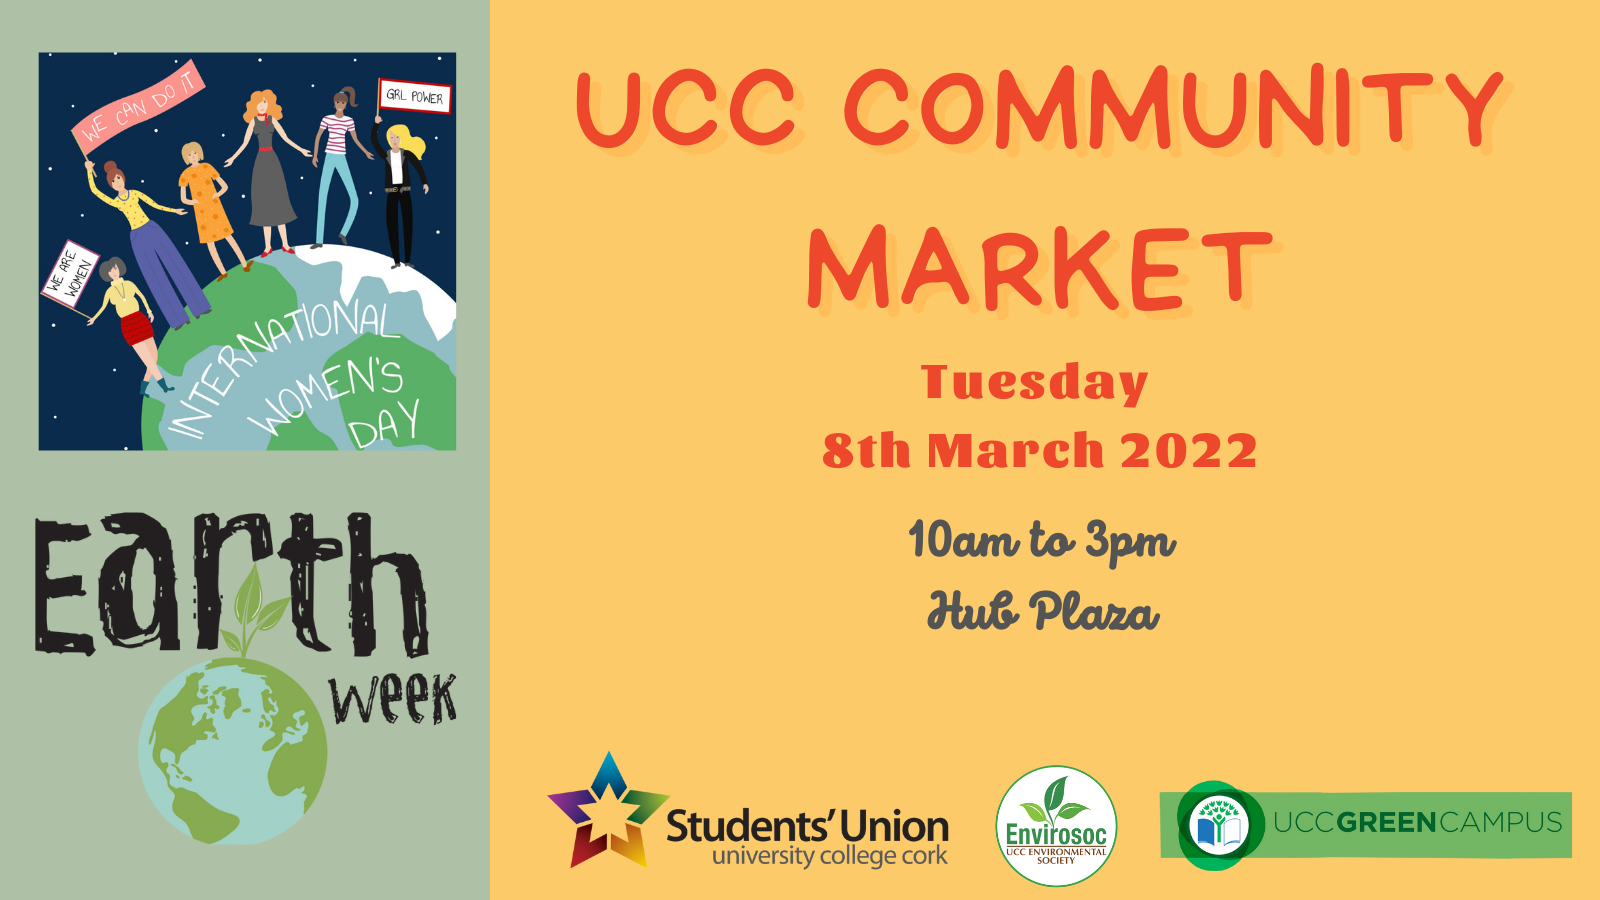 Community Market - Tuesday 8th March 2022